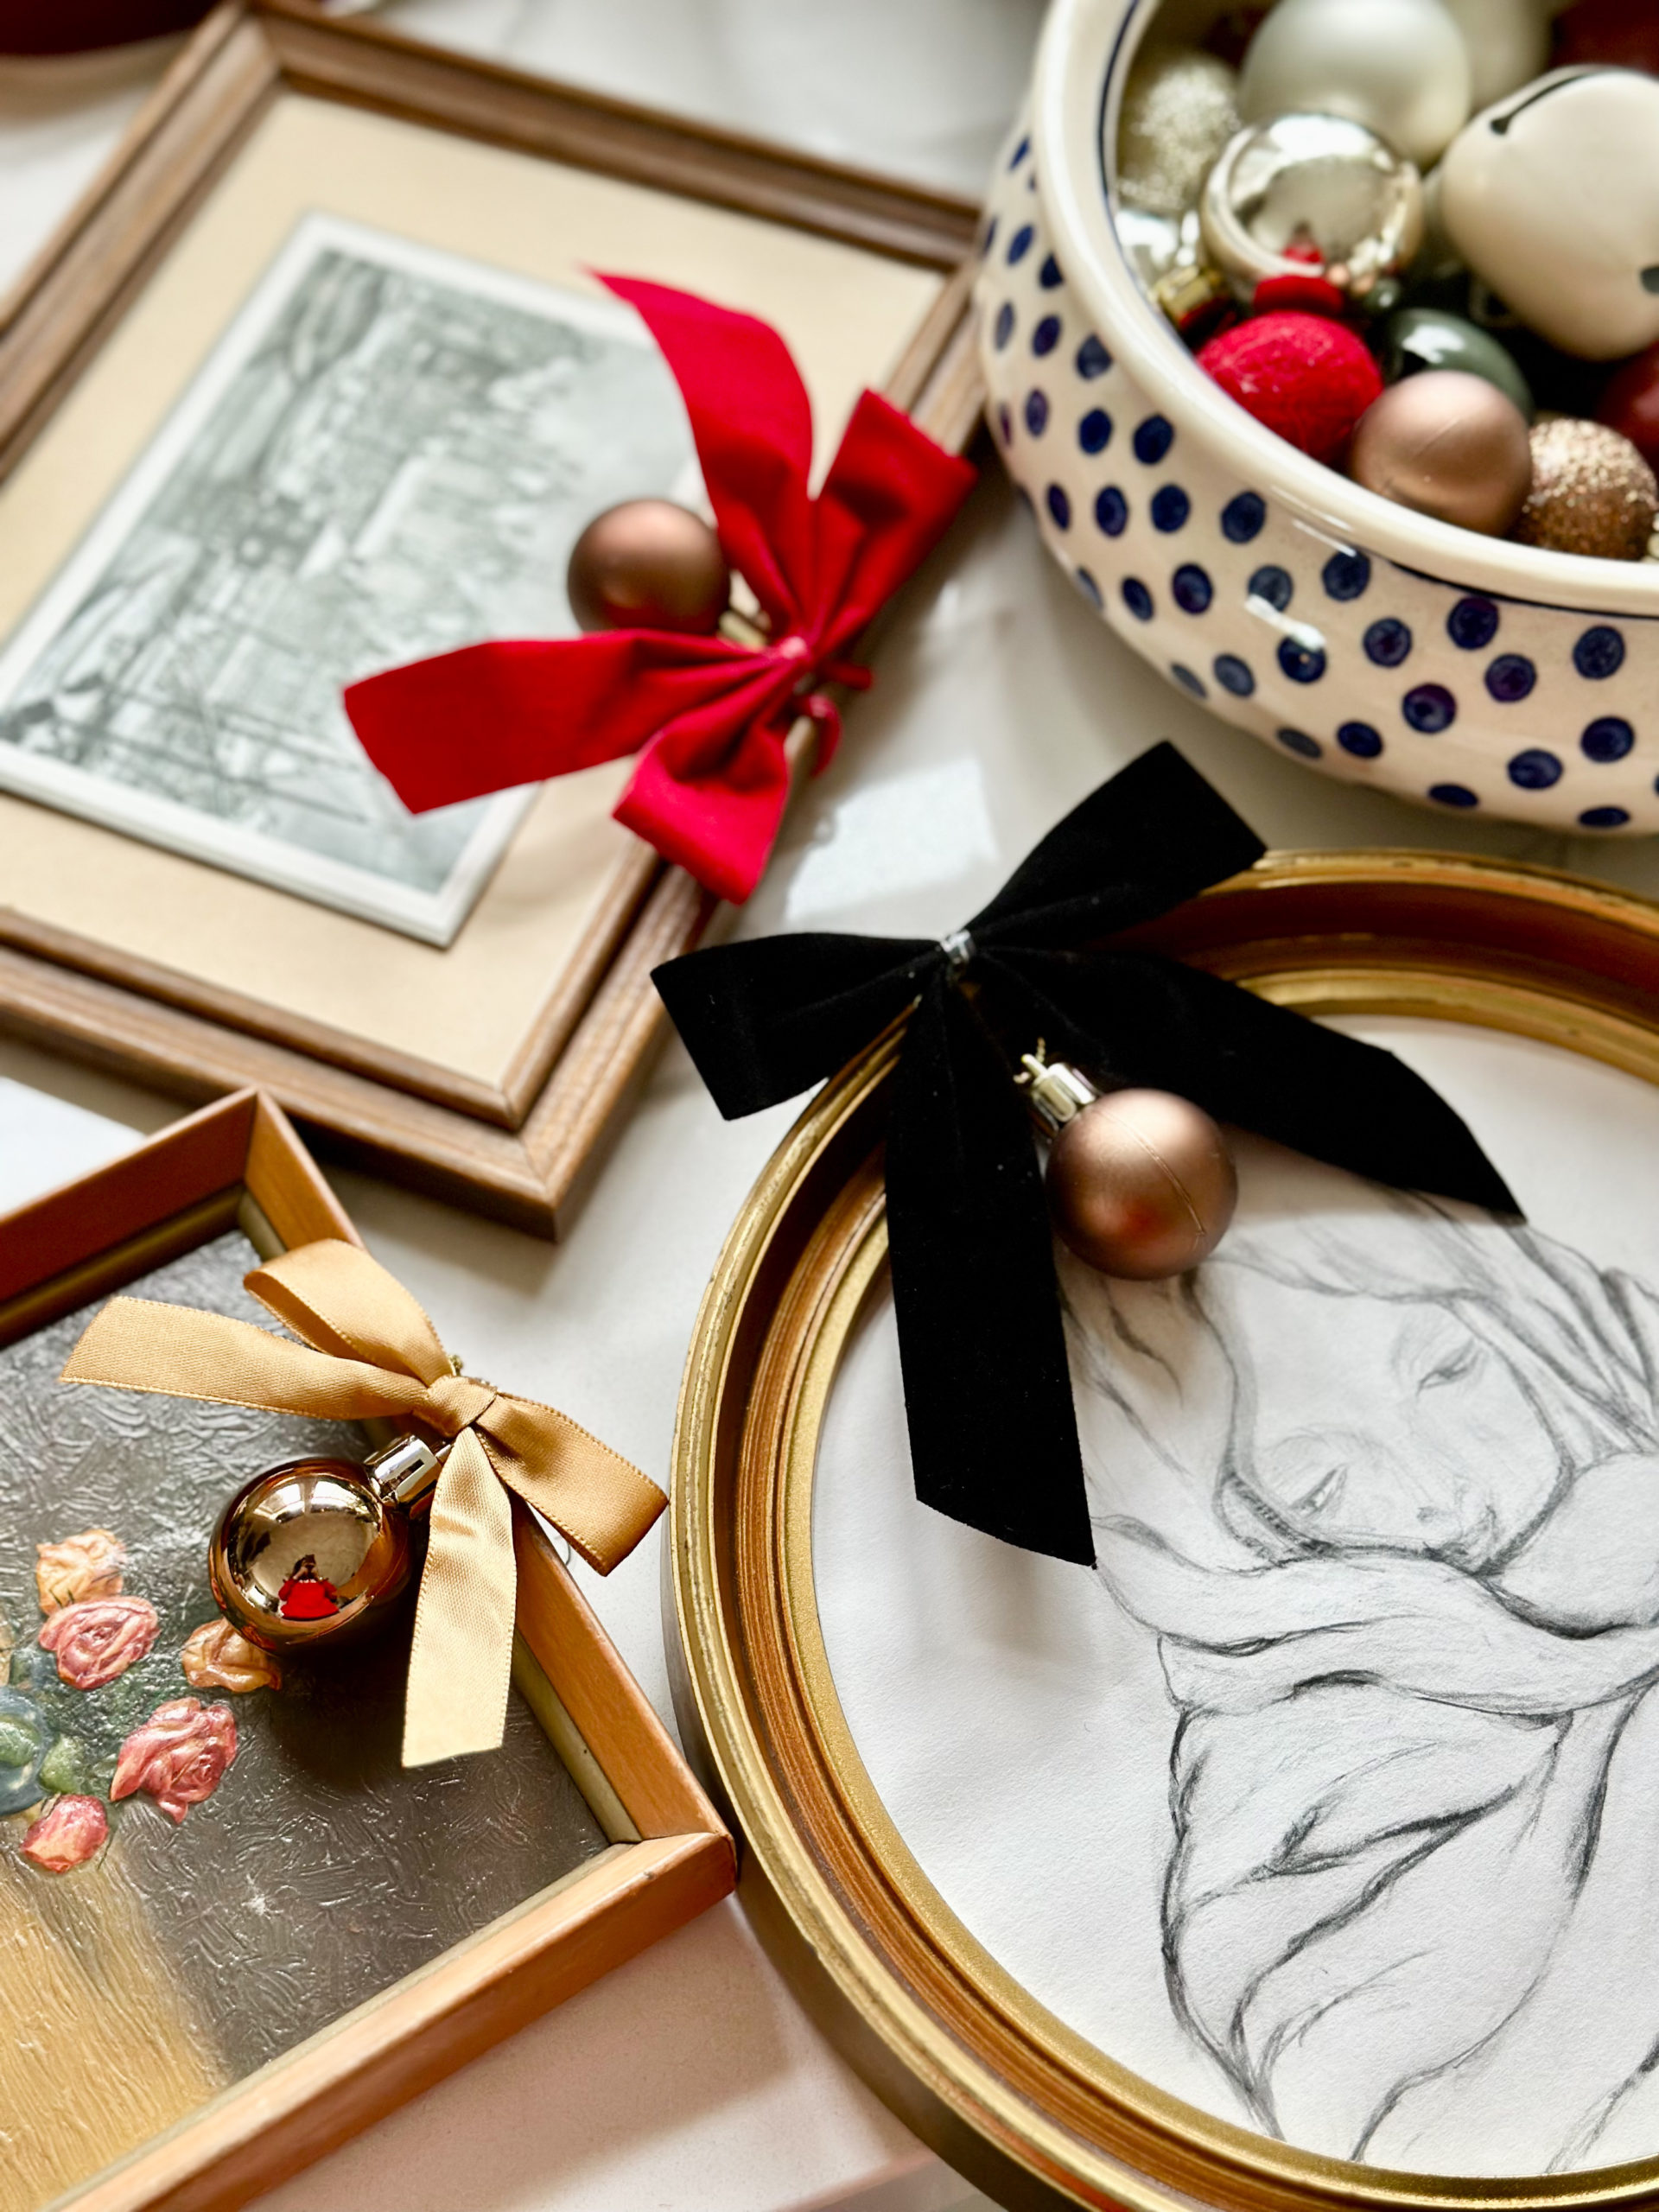 easy and budget friendly ways to decorate for christmas, decorating with bows, decorating art for christmas, christmas decor ideas, bows on frames, decorating art for christmas